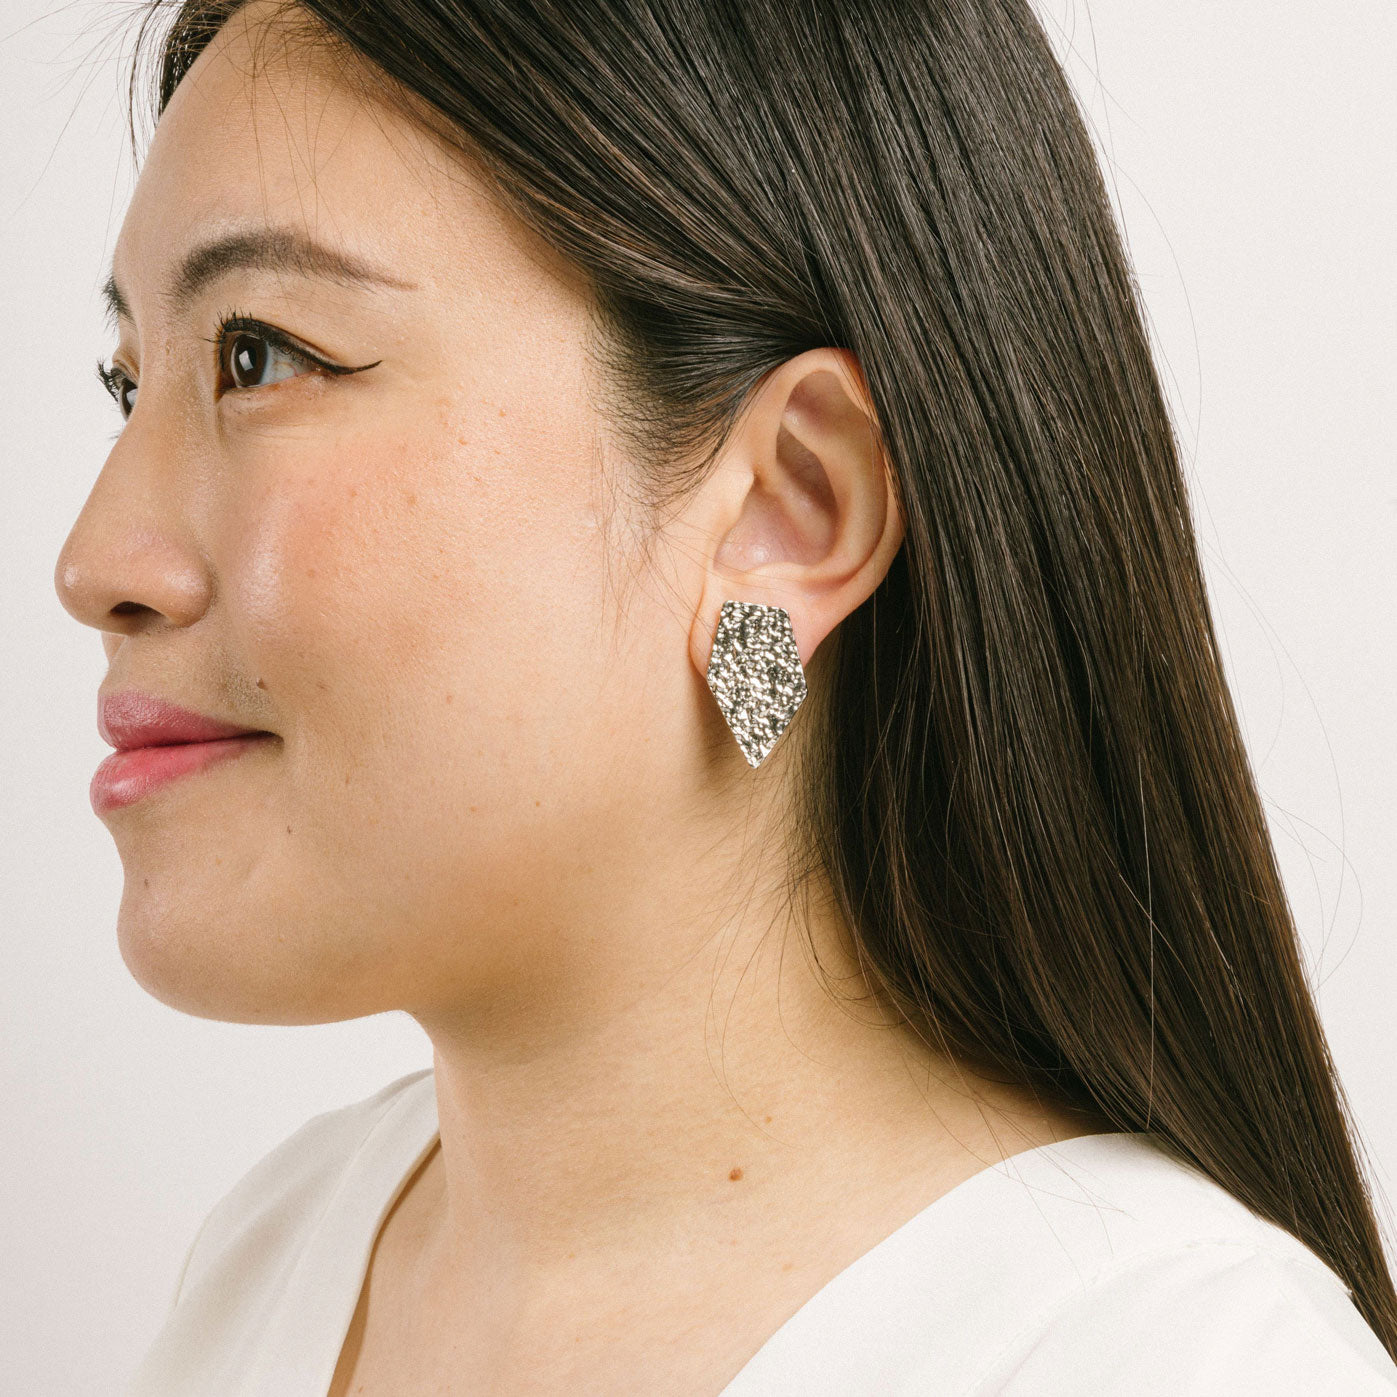 A model wearing the Vesper Clip On Earrings in Silver are padded clip-on earrings with a secure hold. Perfect for all ear types, they offer a comfortable wear for 8-12 hours. Made of zinc and copper alloy, the earrings come with a removable black rubber padding and can be worn as pictured. Please note, item is sold as one pair.